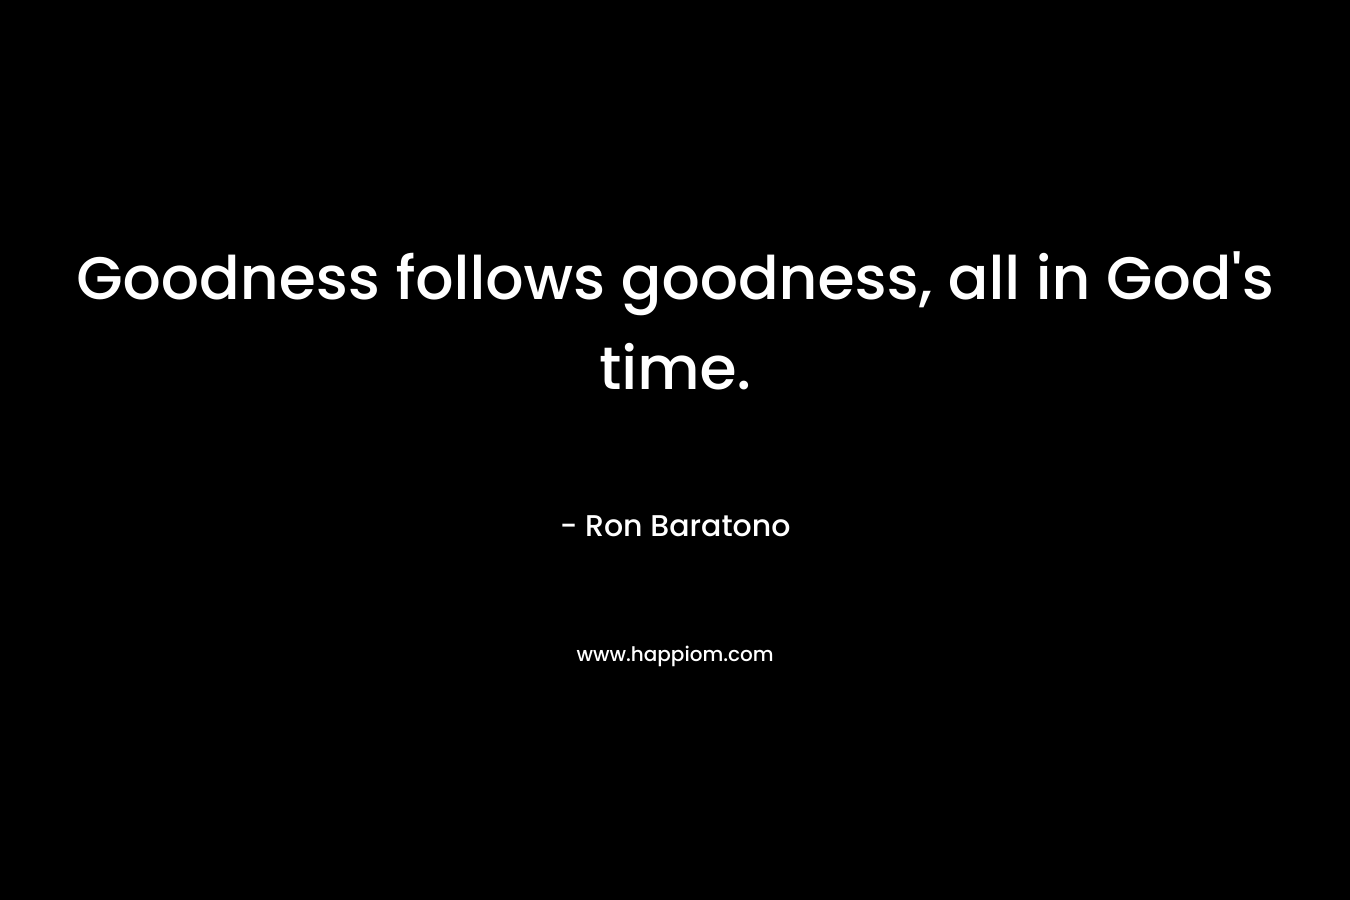 Goodness follows goodness, all in God’s time. – Ron Baratono